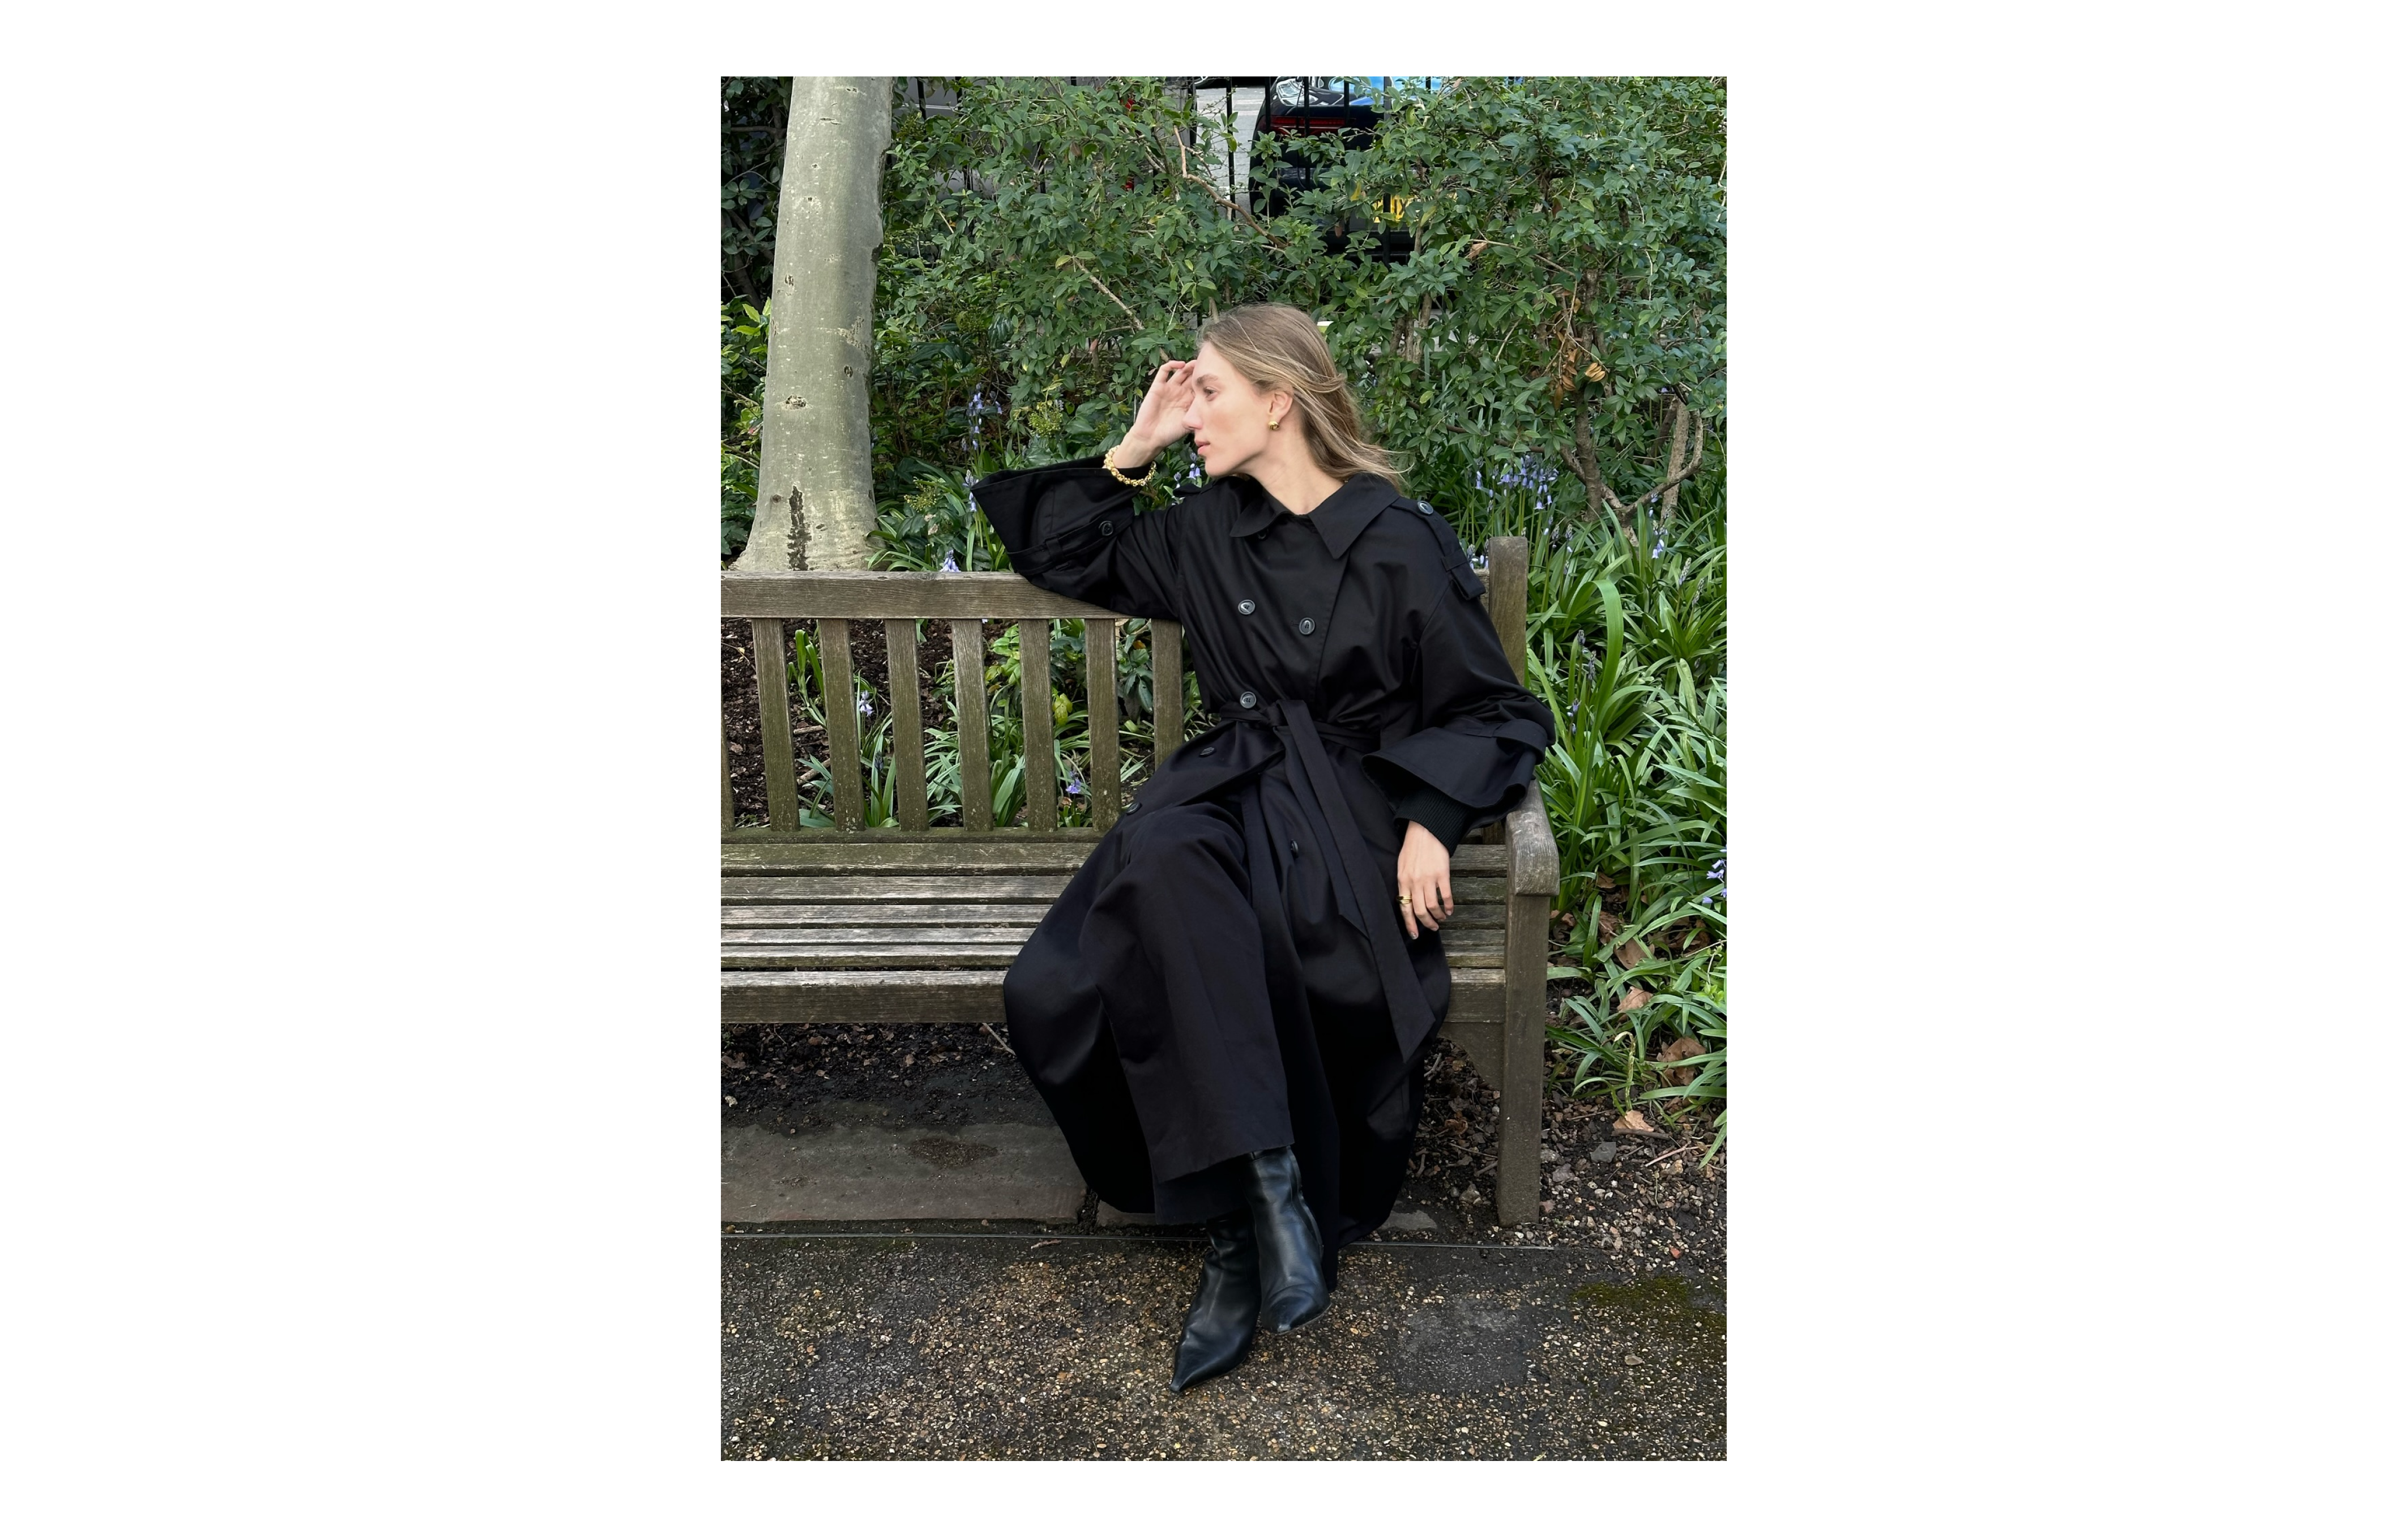 Amalie taking a break in one of the many parks of London. She is wearing the Flora Bracelet and The Elizabeth Earrings from the LIÉ STUDIO x NET-A-PORTER capsule collection. 